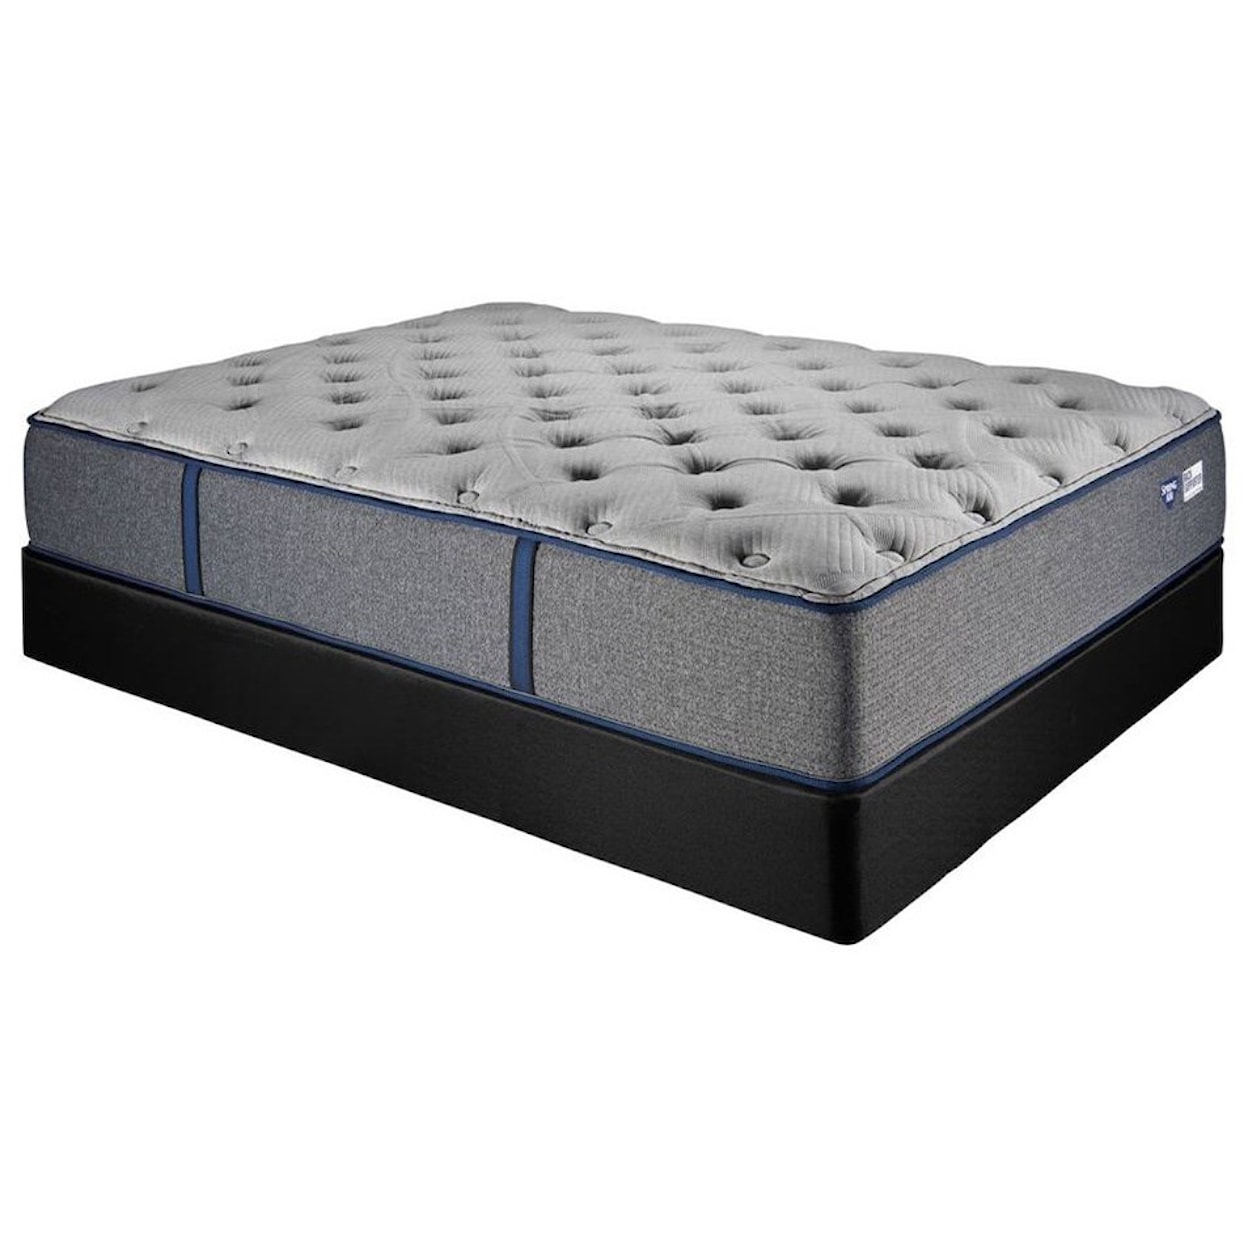 Spring Air Calypso P Cal King Pocketed Coil Mattress Low Pro Set